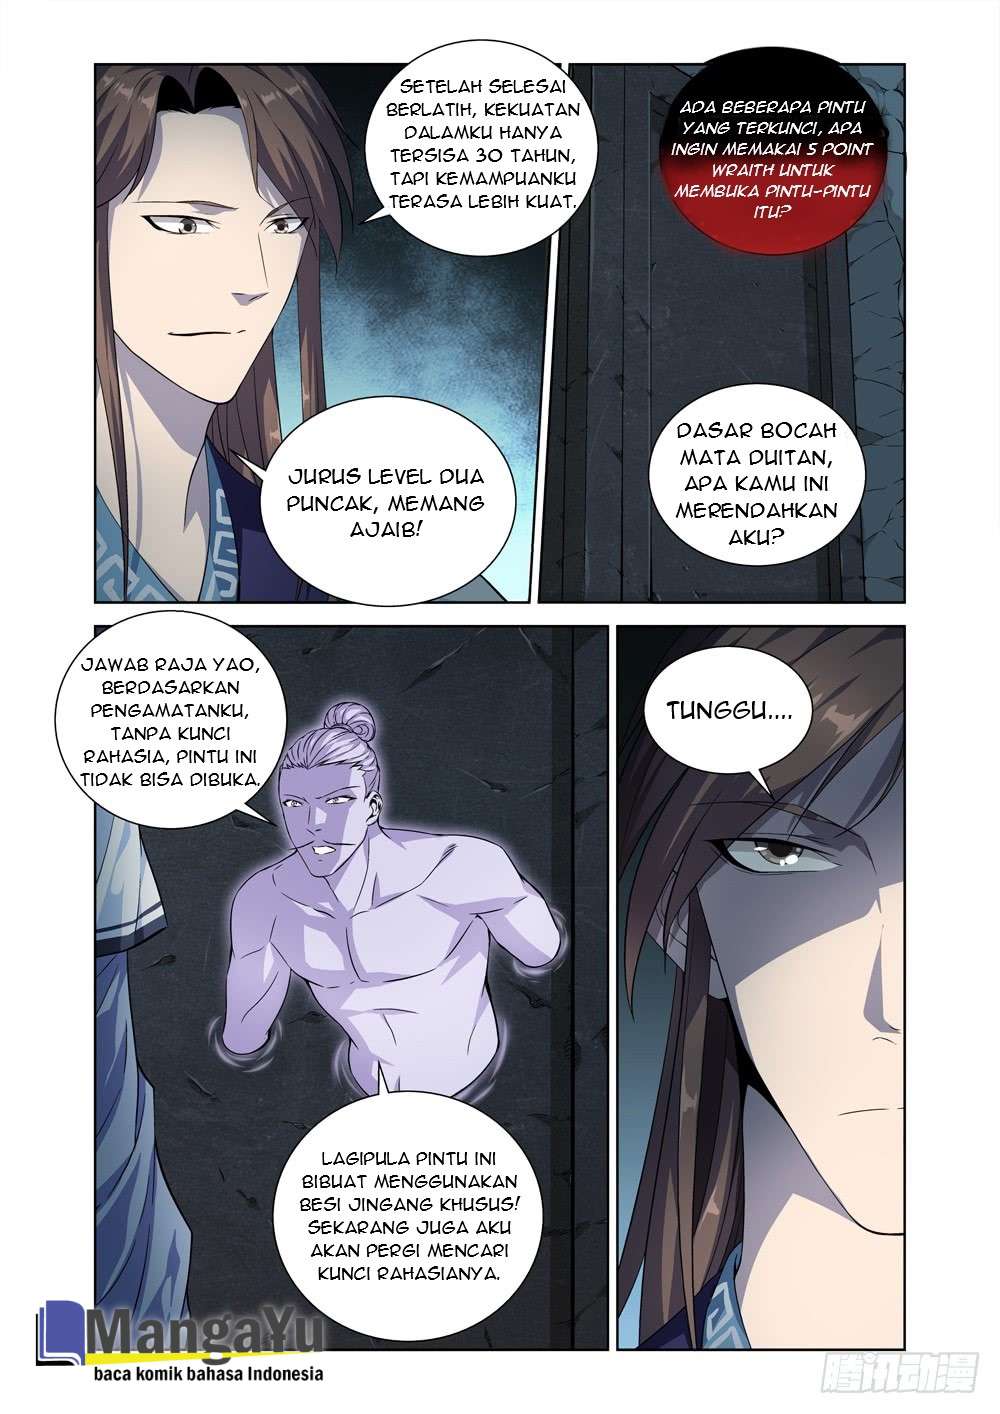 Strongest System Yan Luo Chapter 6